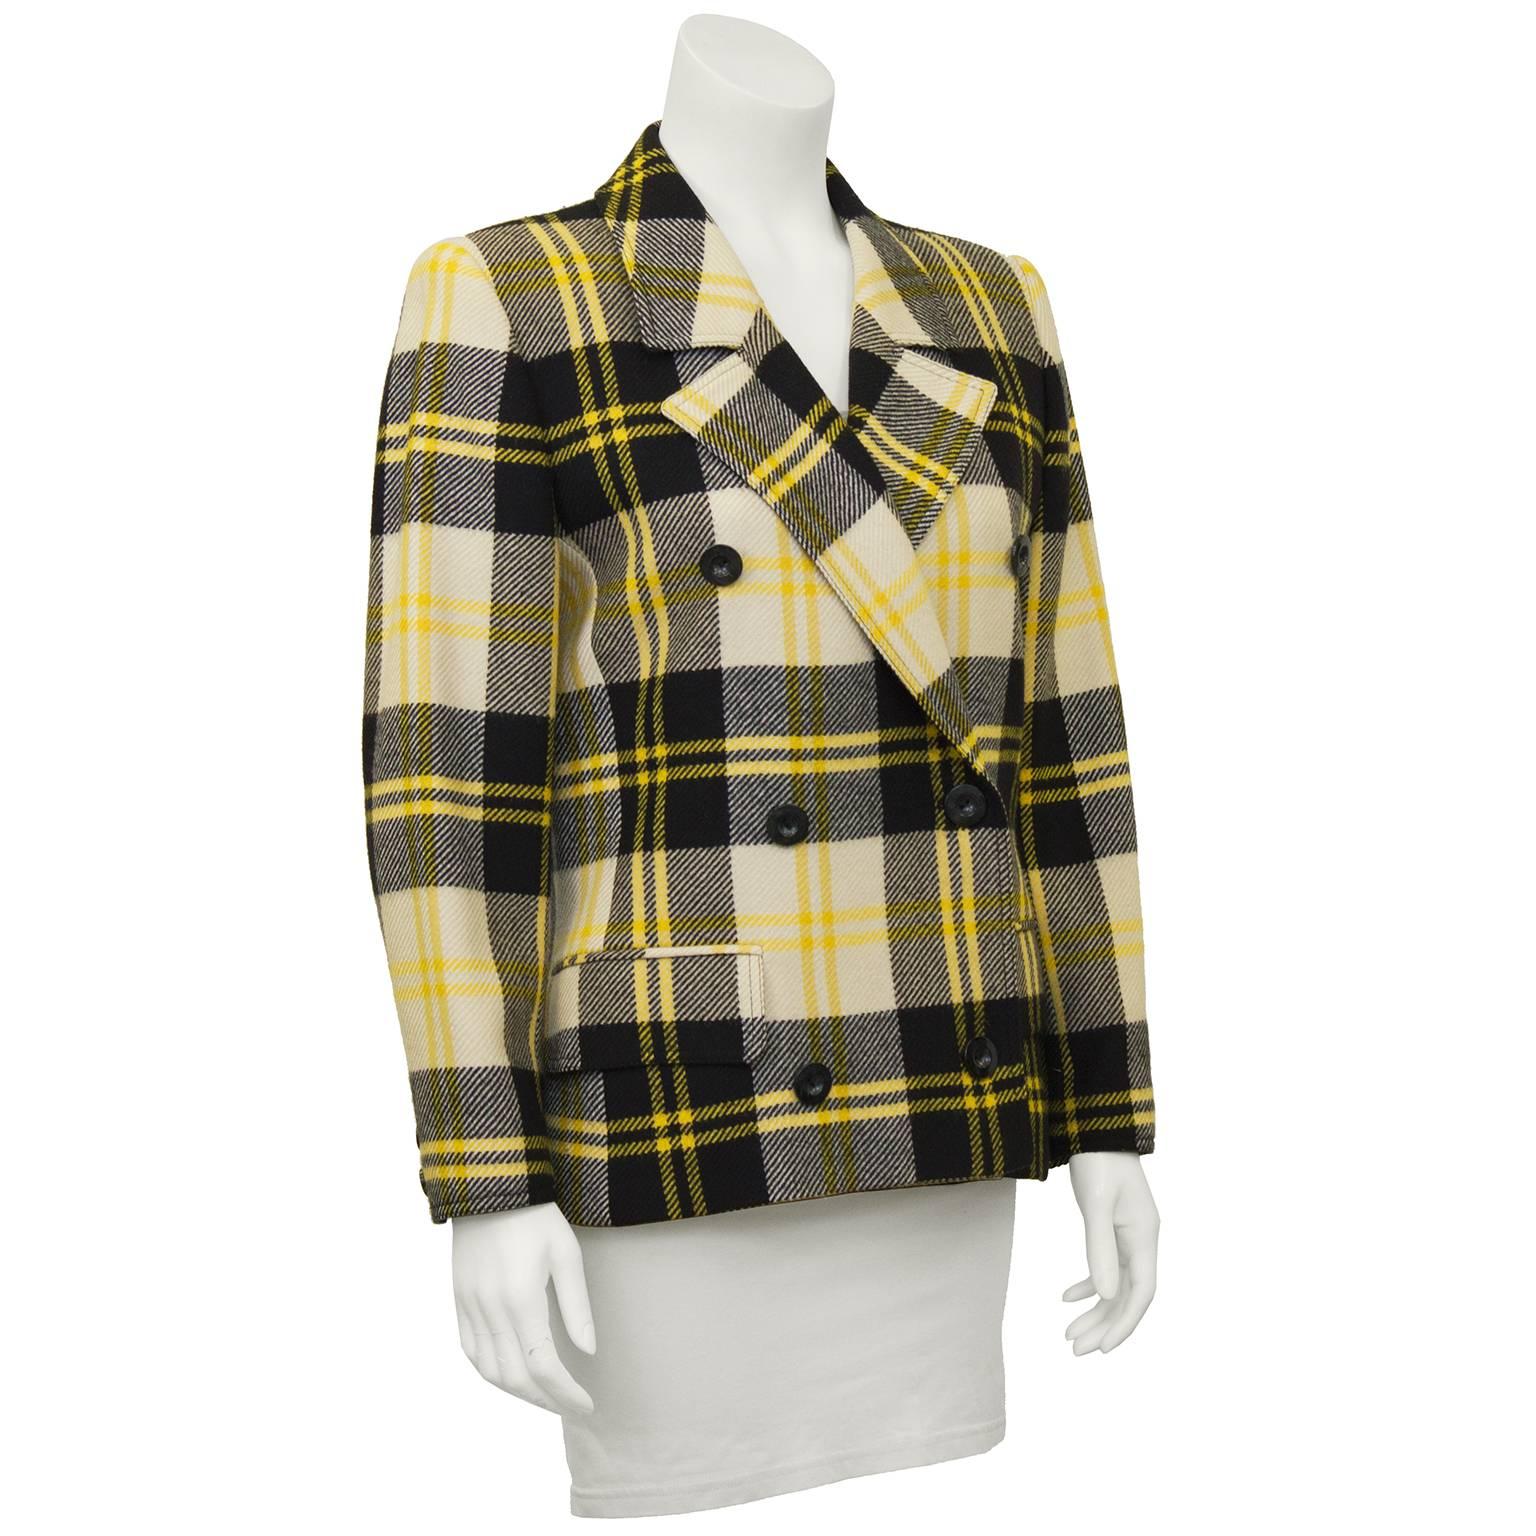 1990's Valentino wool plaid double breasted blazer. Chic cropped fit hitting just mid hip. Double breasted, fitted jacket with notched collar, and half belt in the back. Two flap pockets just below the waist. Modern look, no power shoulder. Fits